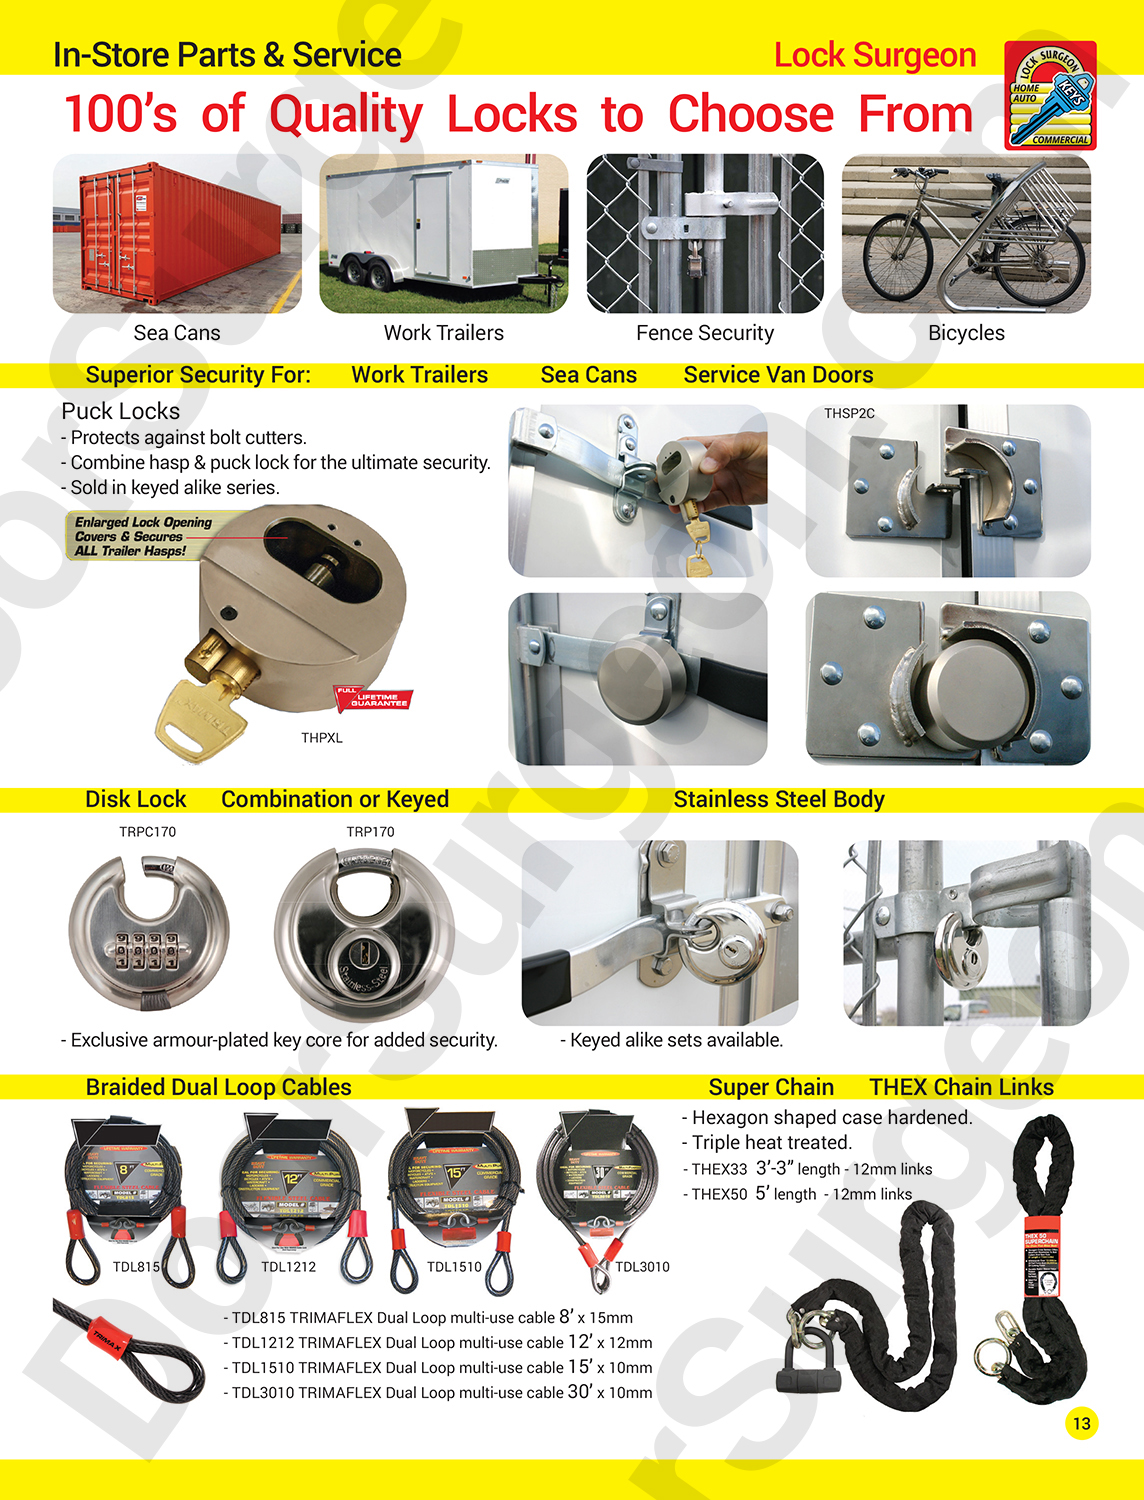 Superior security locks for Sea Cans Work Trailers Fences and equipment.